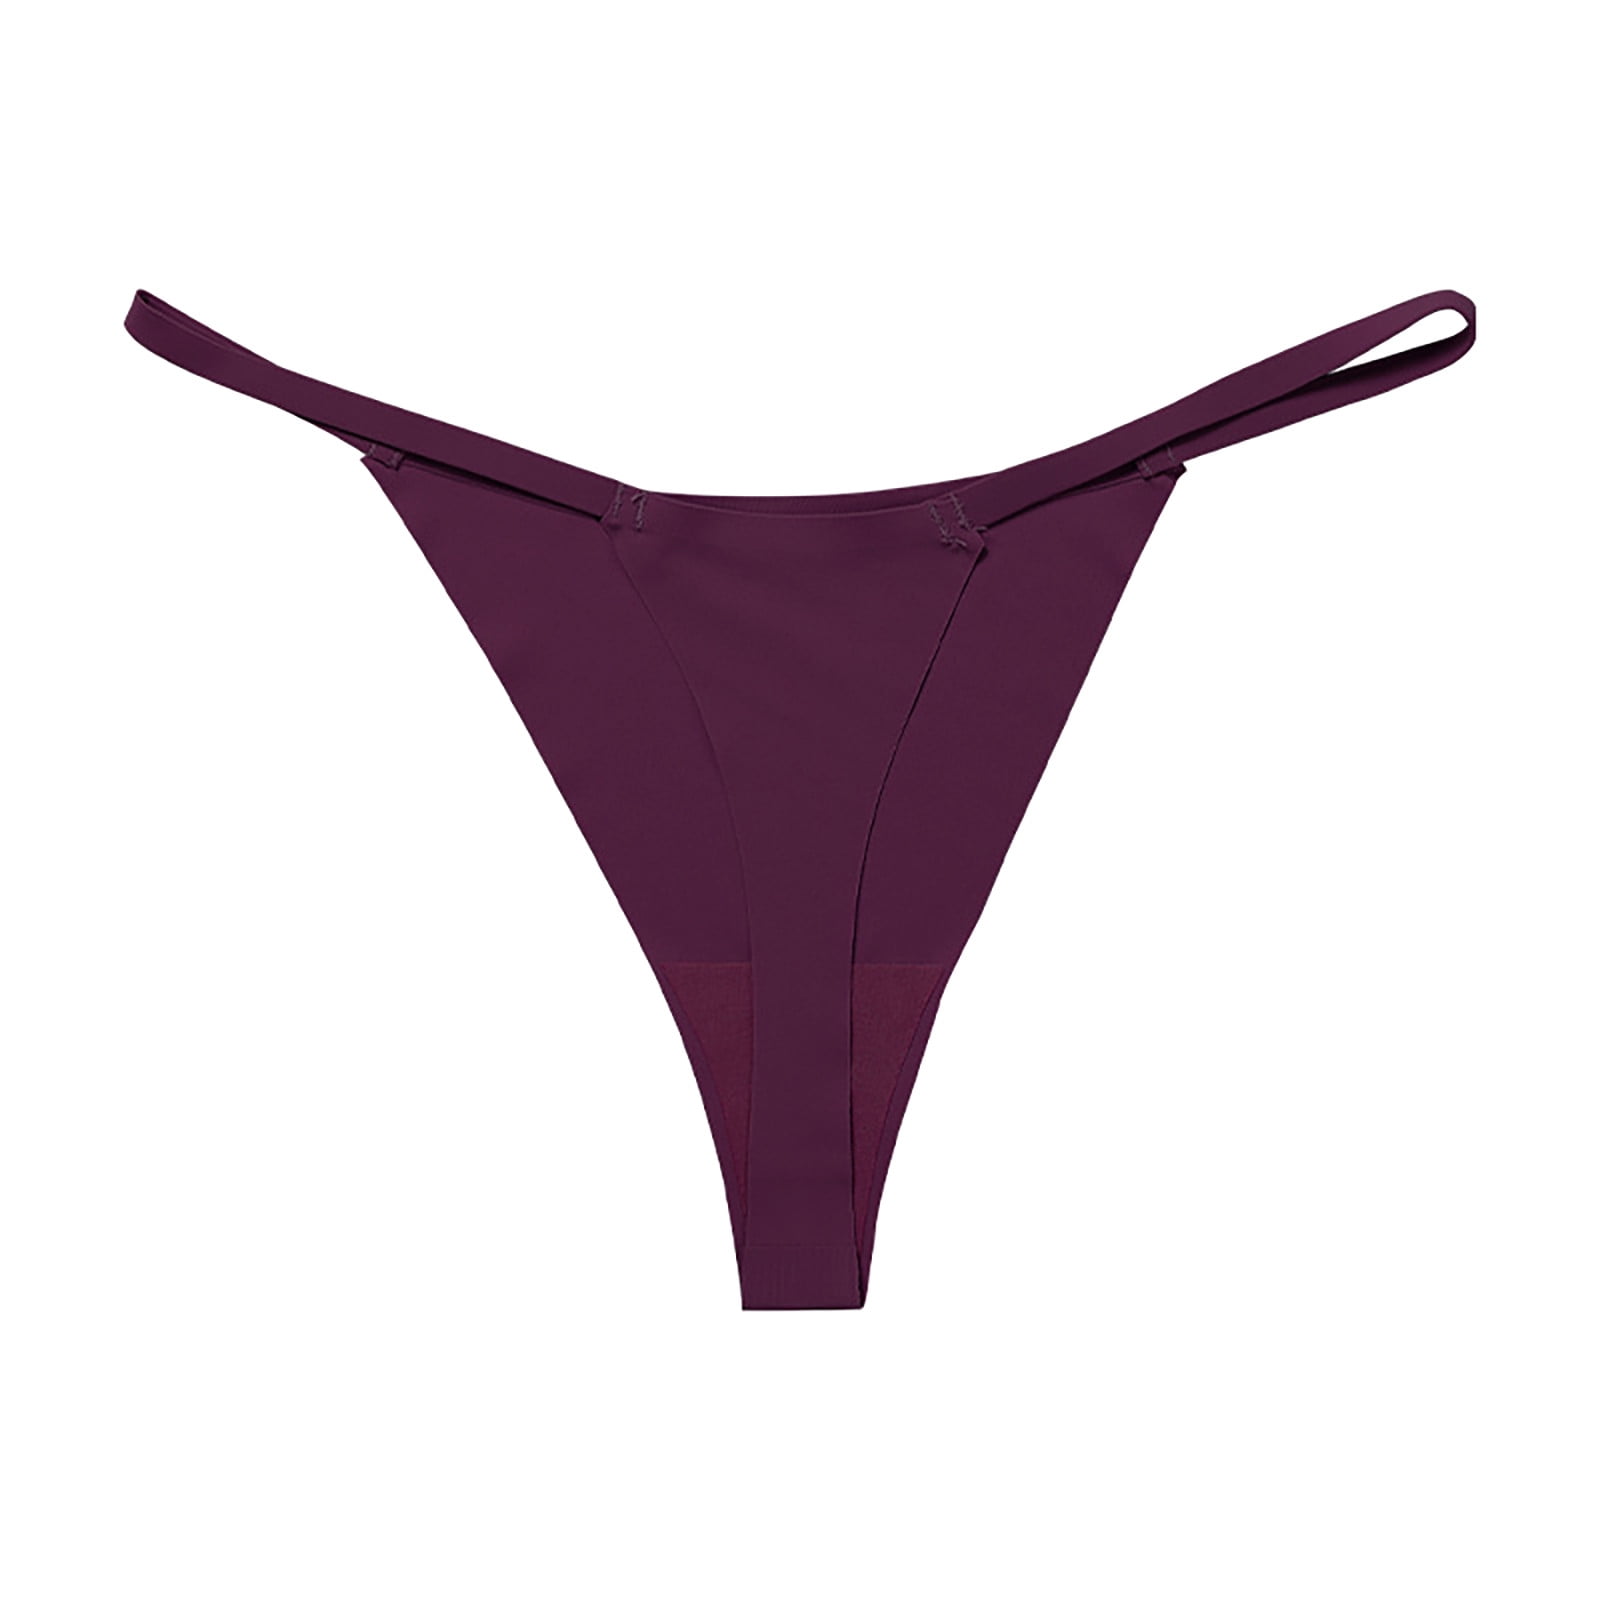 Knosfe Seamless Underwear Thong String Soft Low Rise Stretch Seamless Cute Panties For Teen